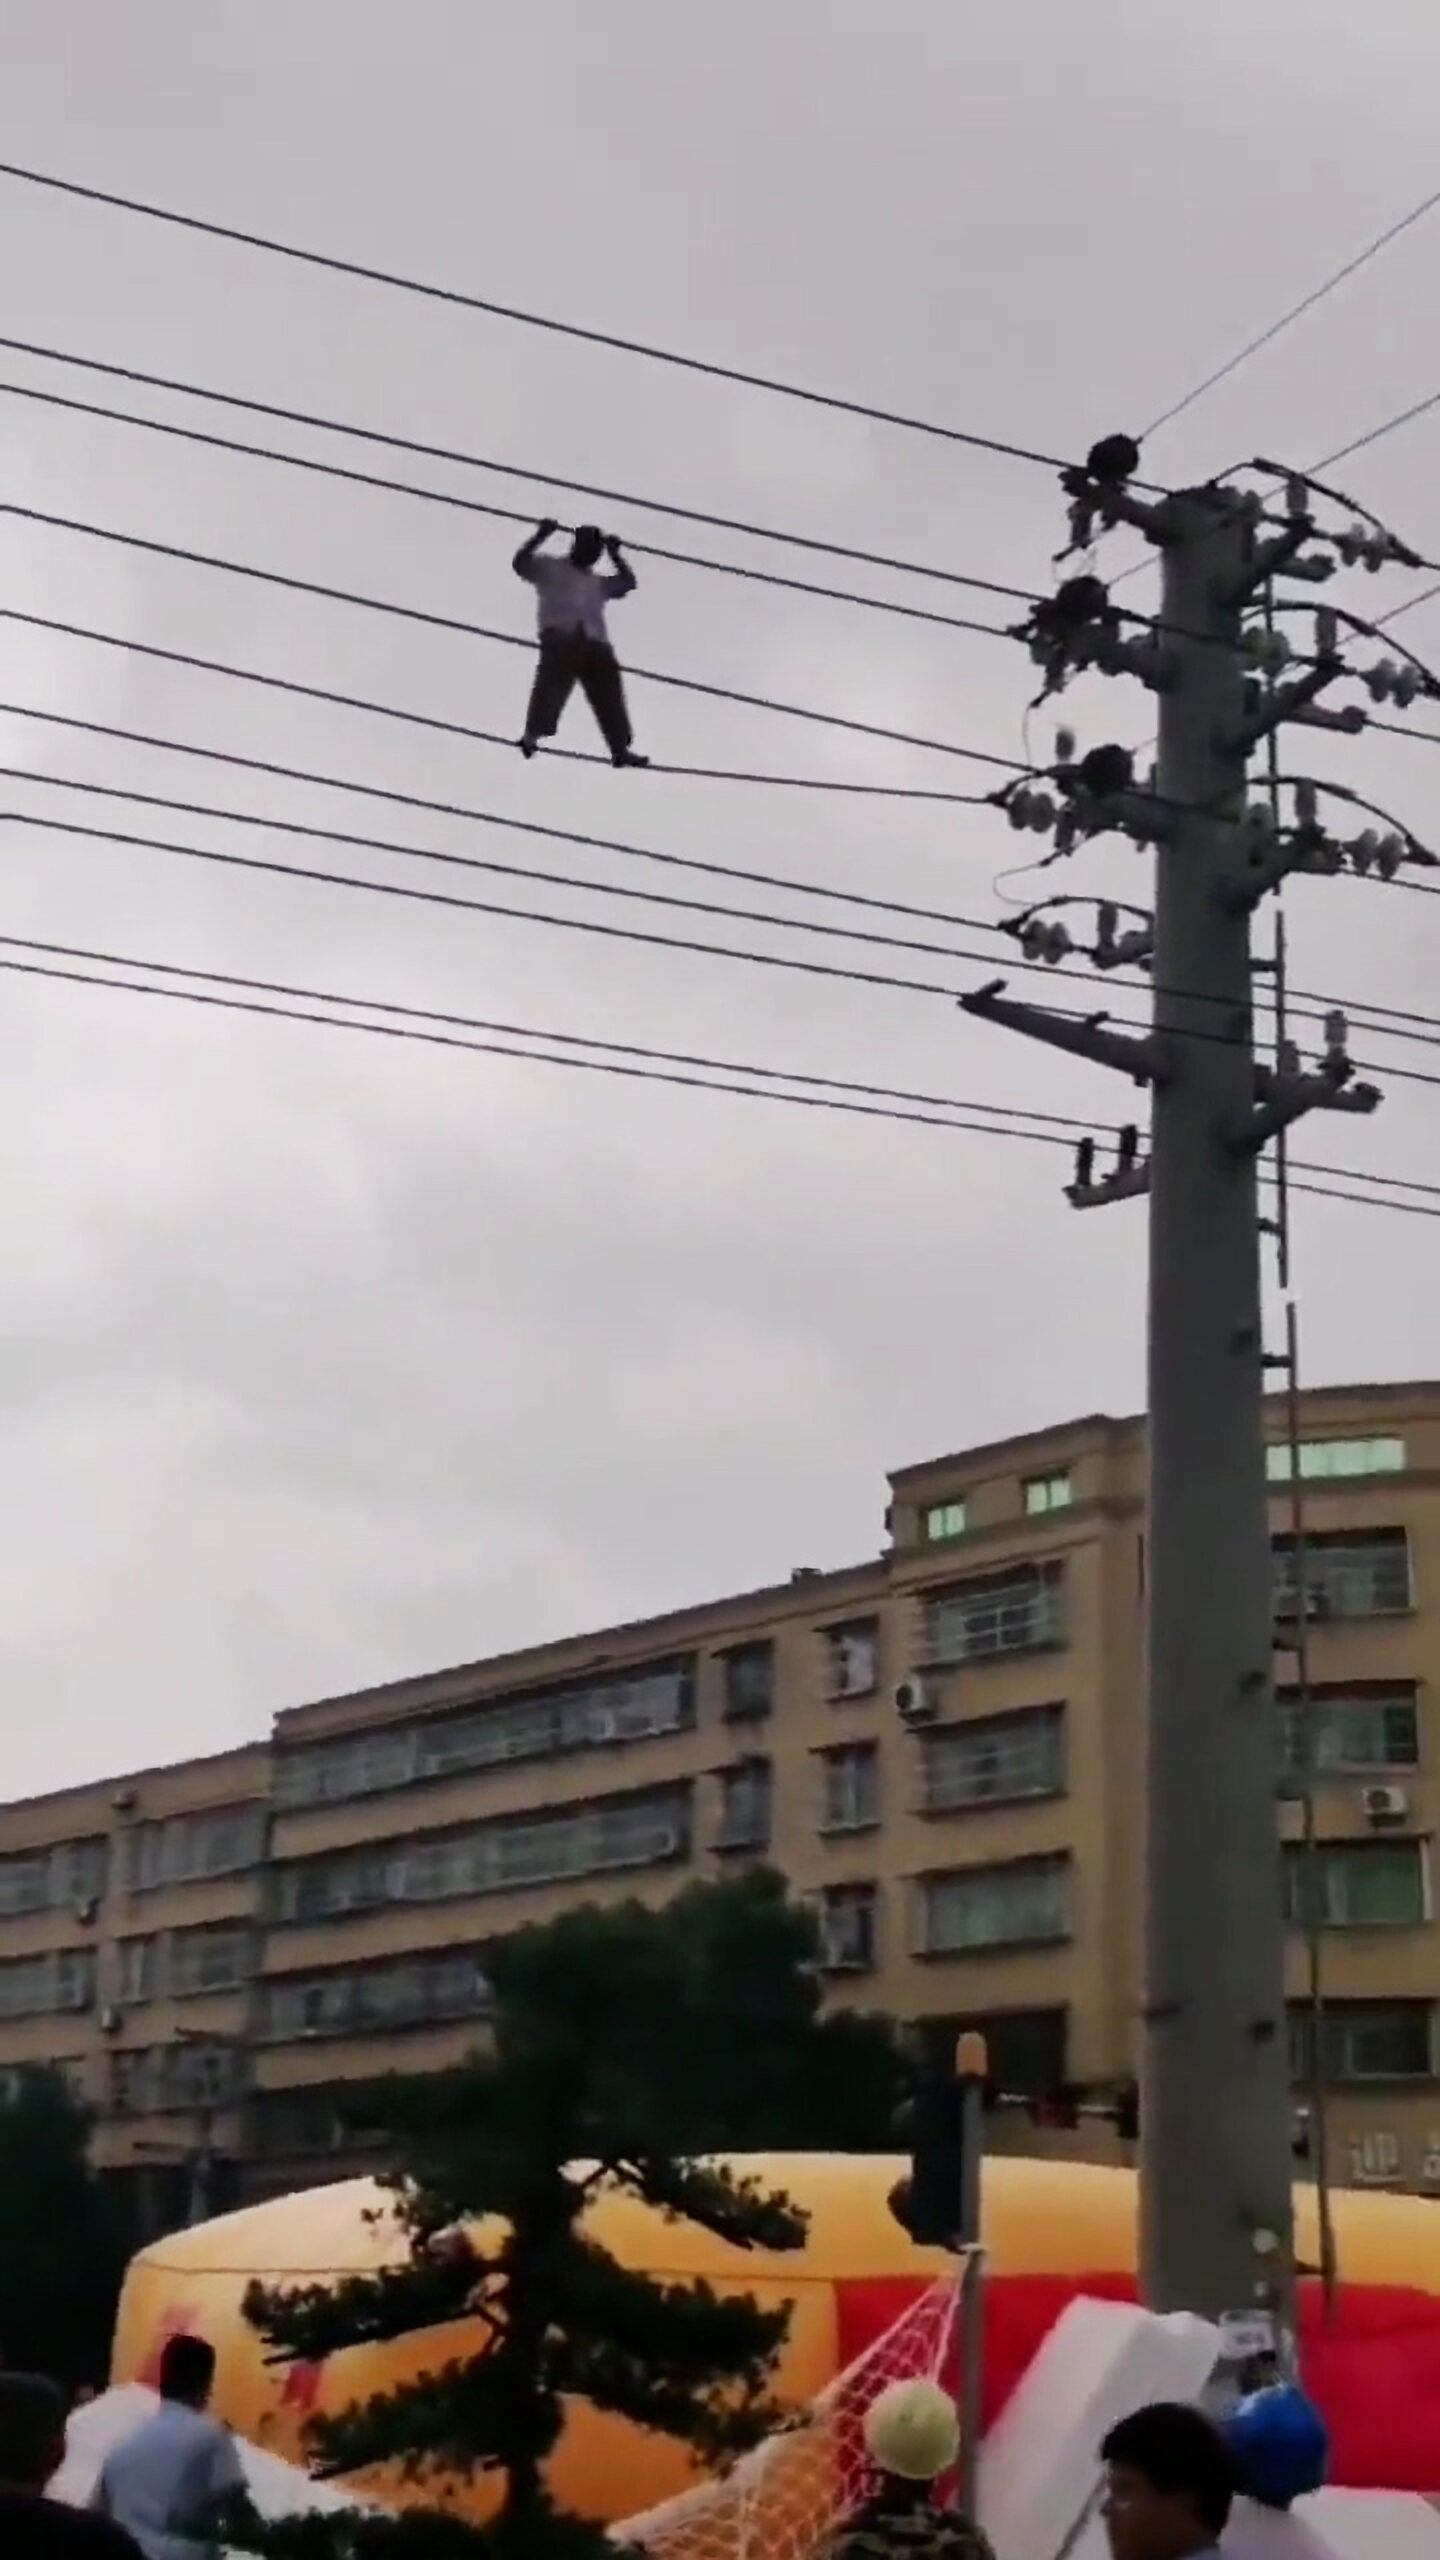  Biker Climbs Power Cable In Bid To Escape Fine For Not Wearing A Helmet